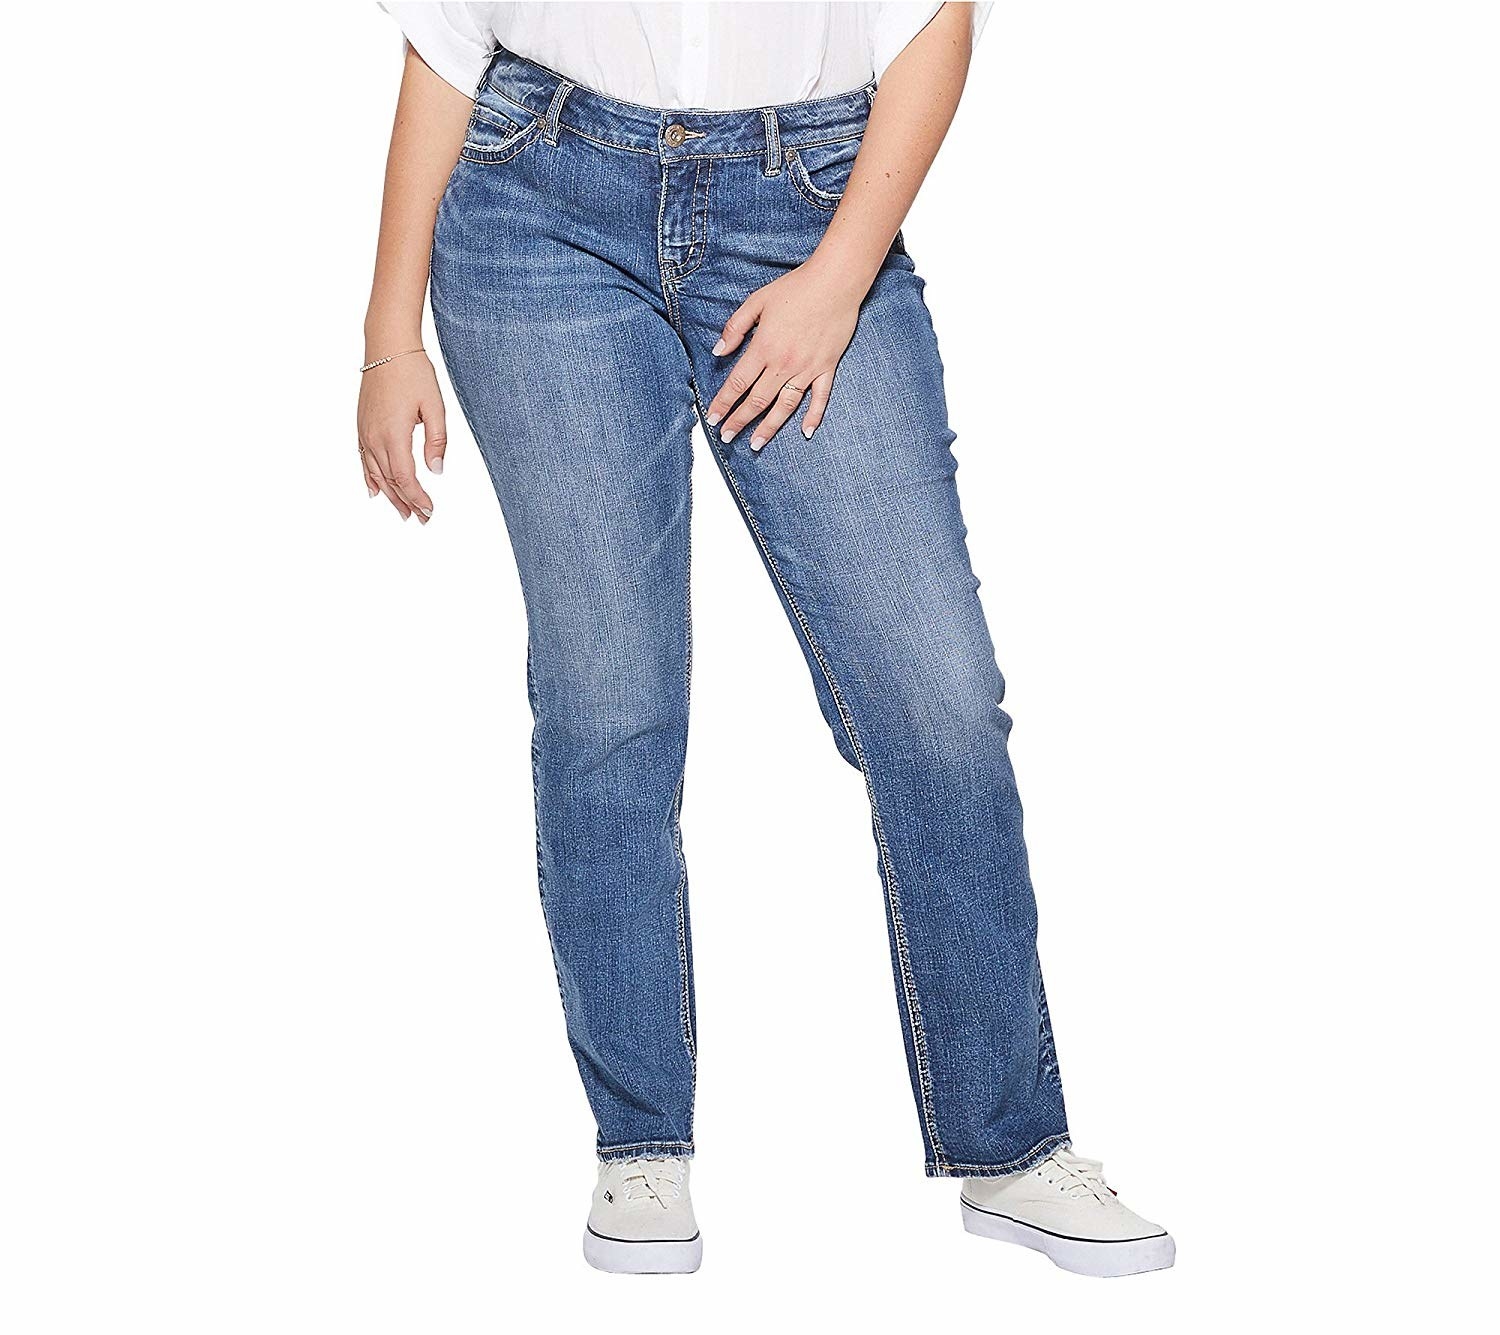 one size fits all jeans buzzfeed brand